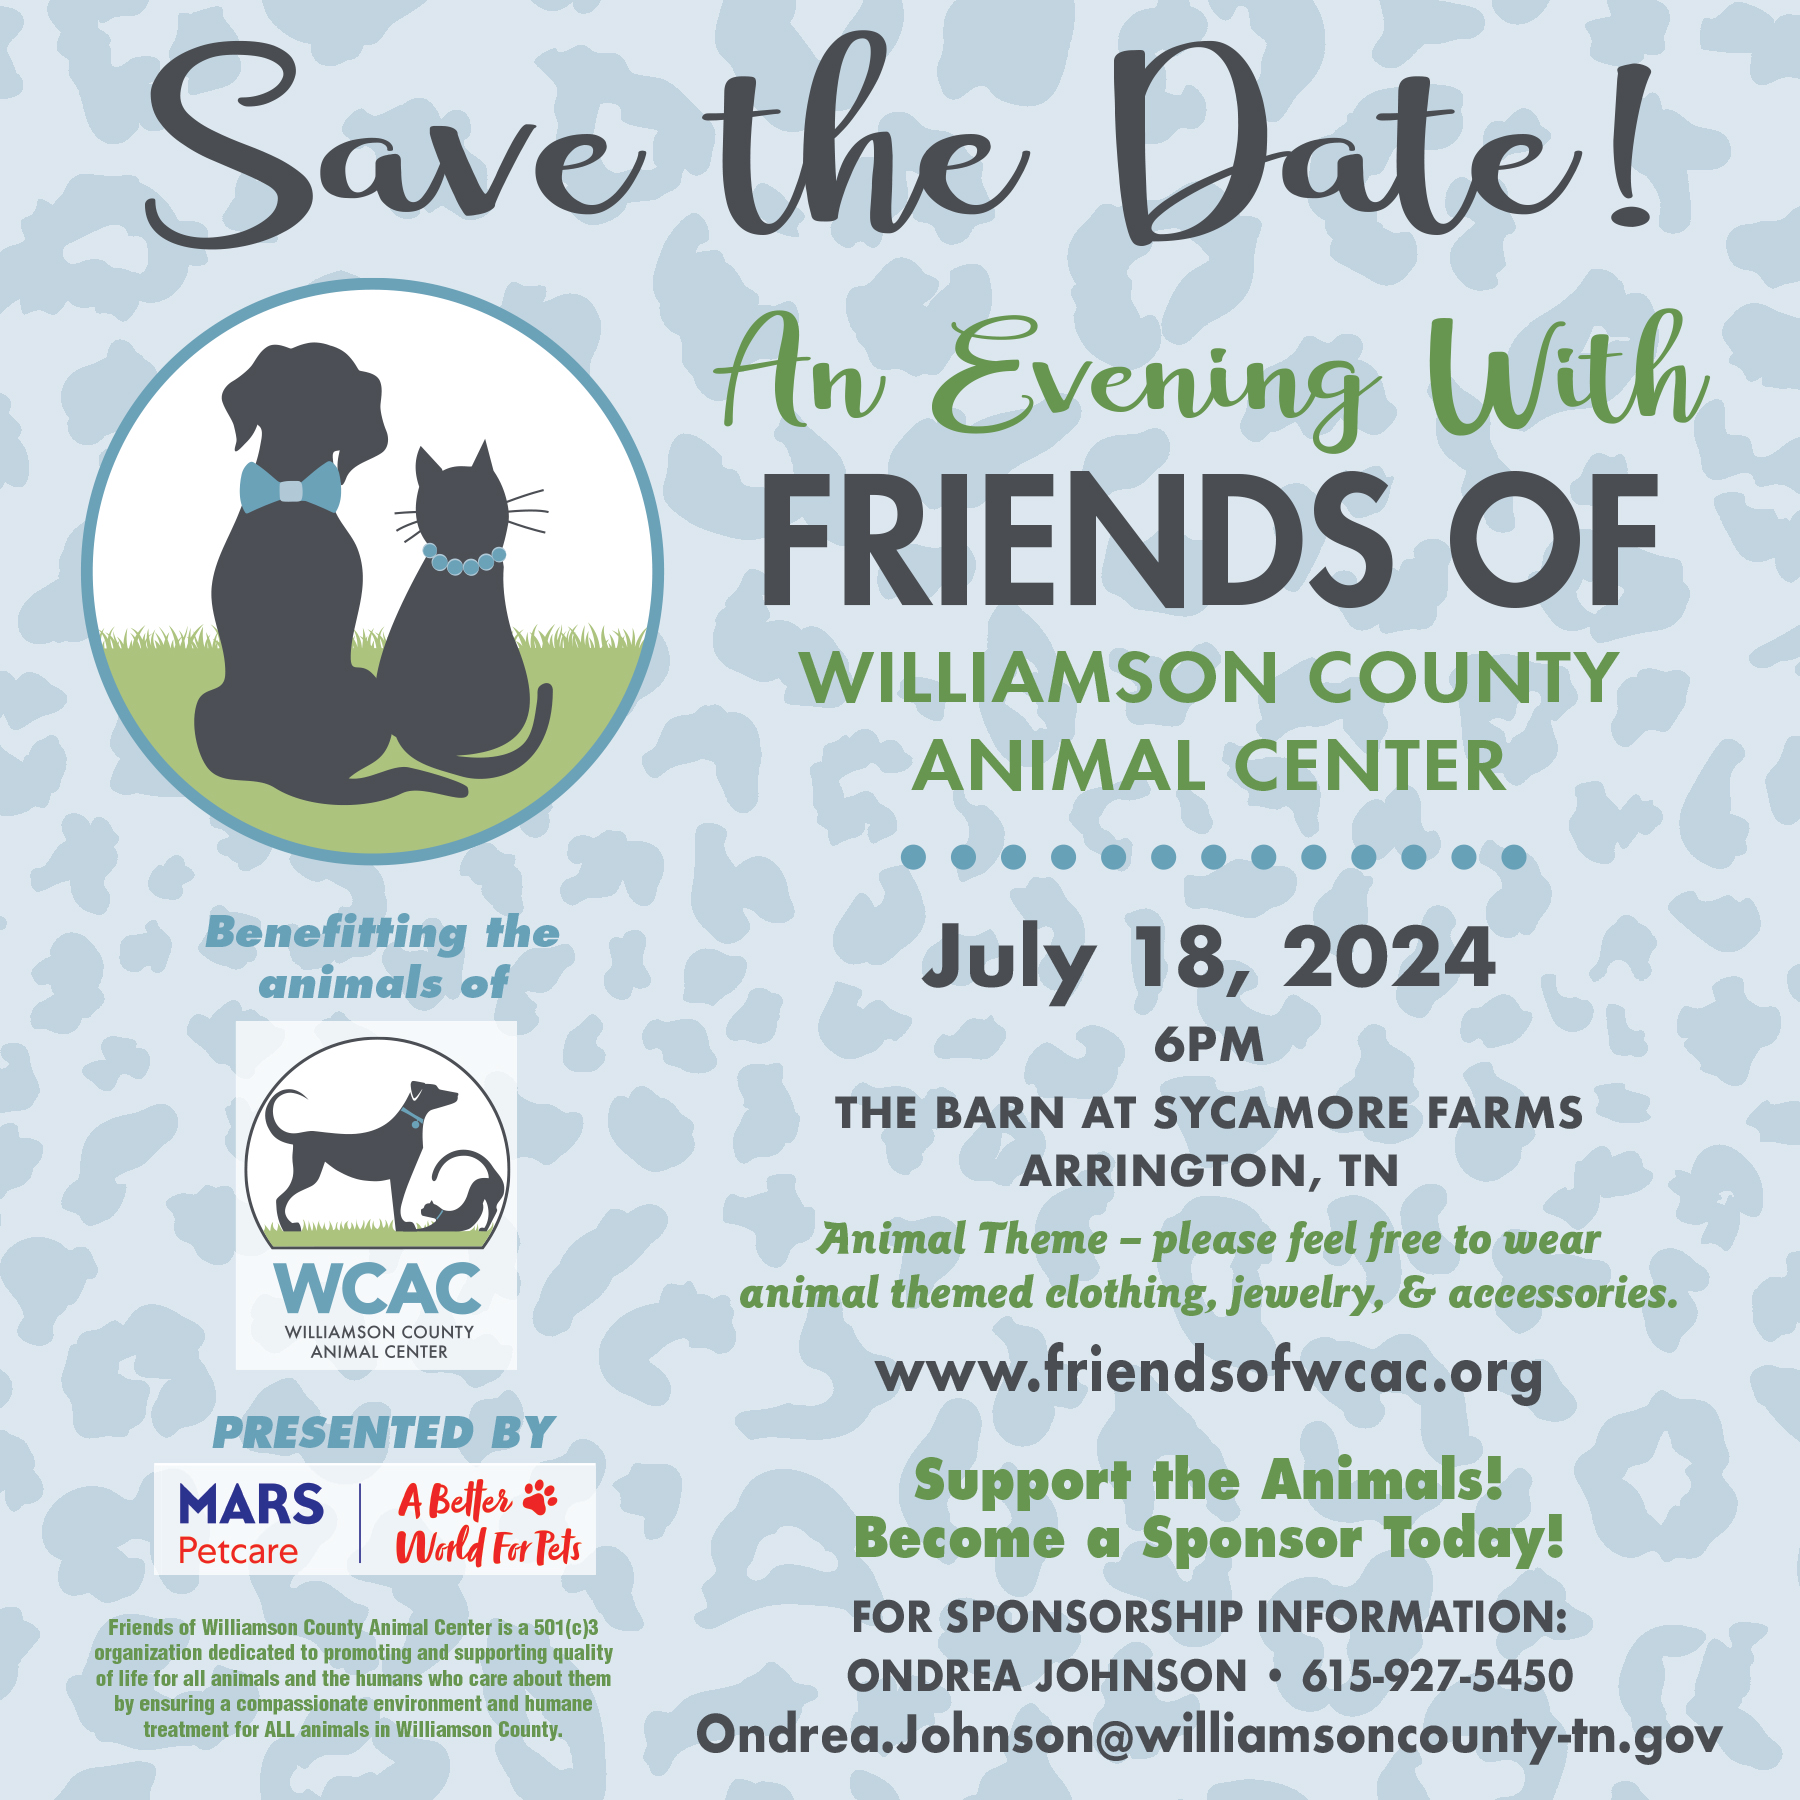 Williamson County Animal Center “An Evening with Friends” fundraiser 2024.